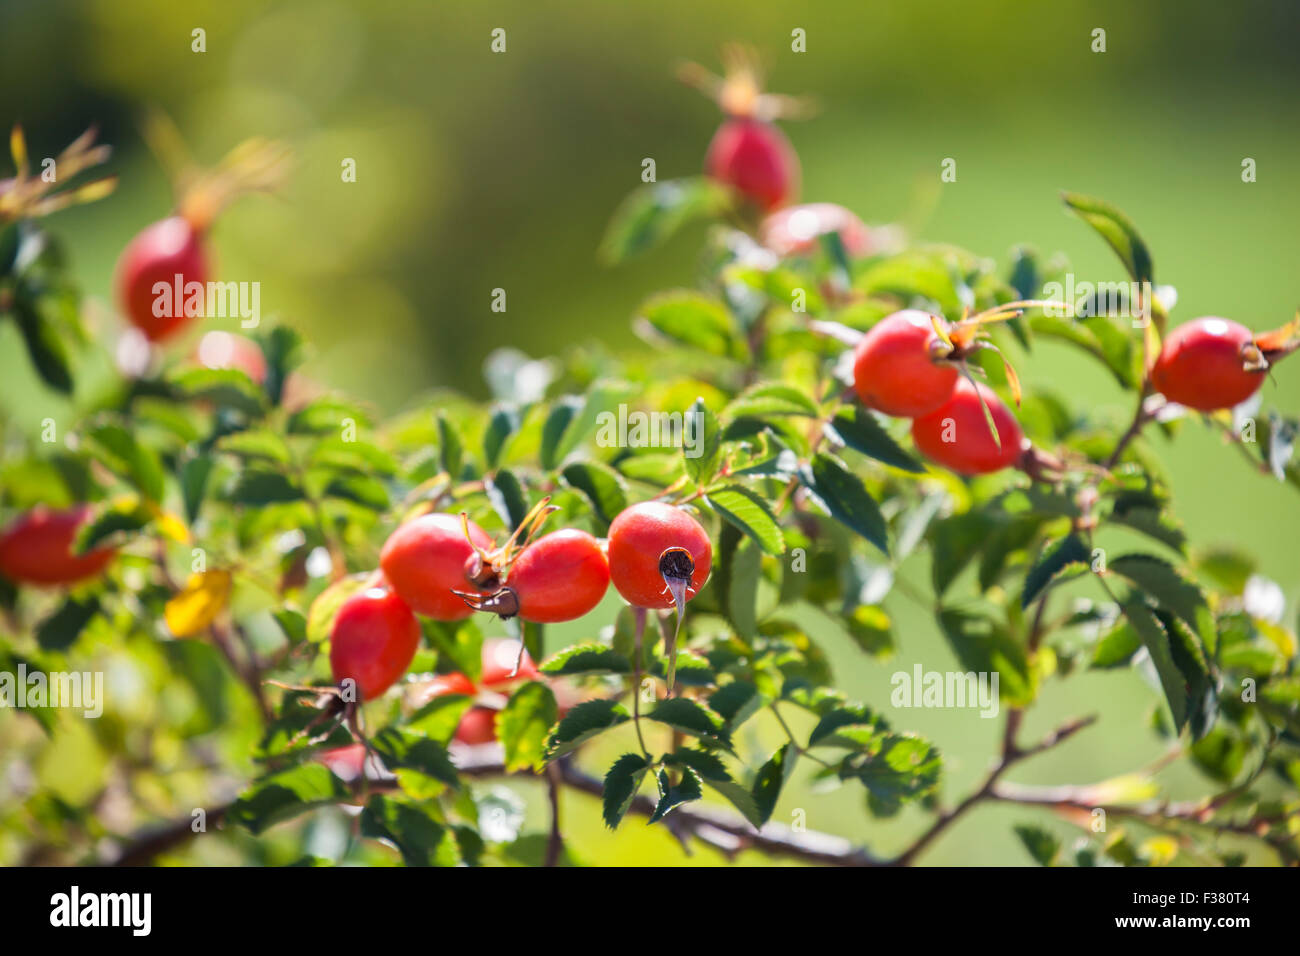 Branch of hip bush with many red ripe rosehips under an autumn sun rays. A natural fruit growing free and ready for picking in t Stock Photo